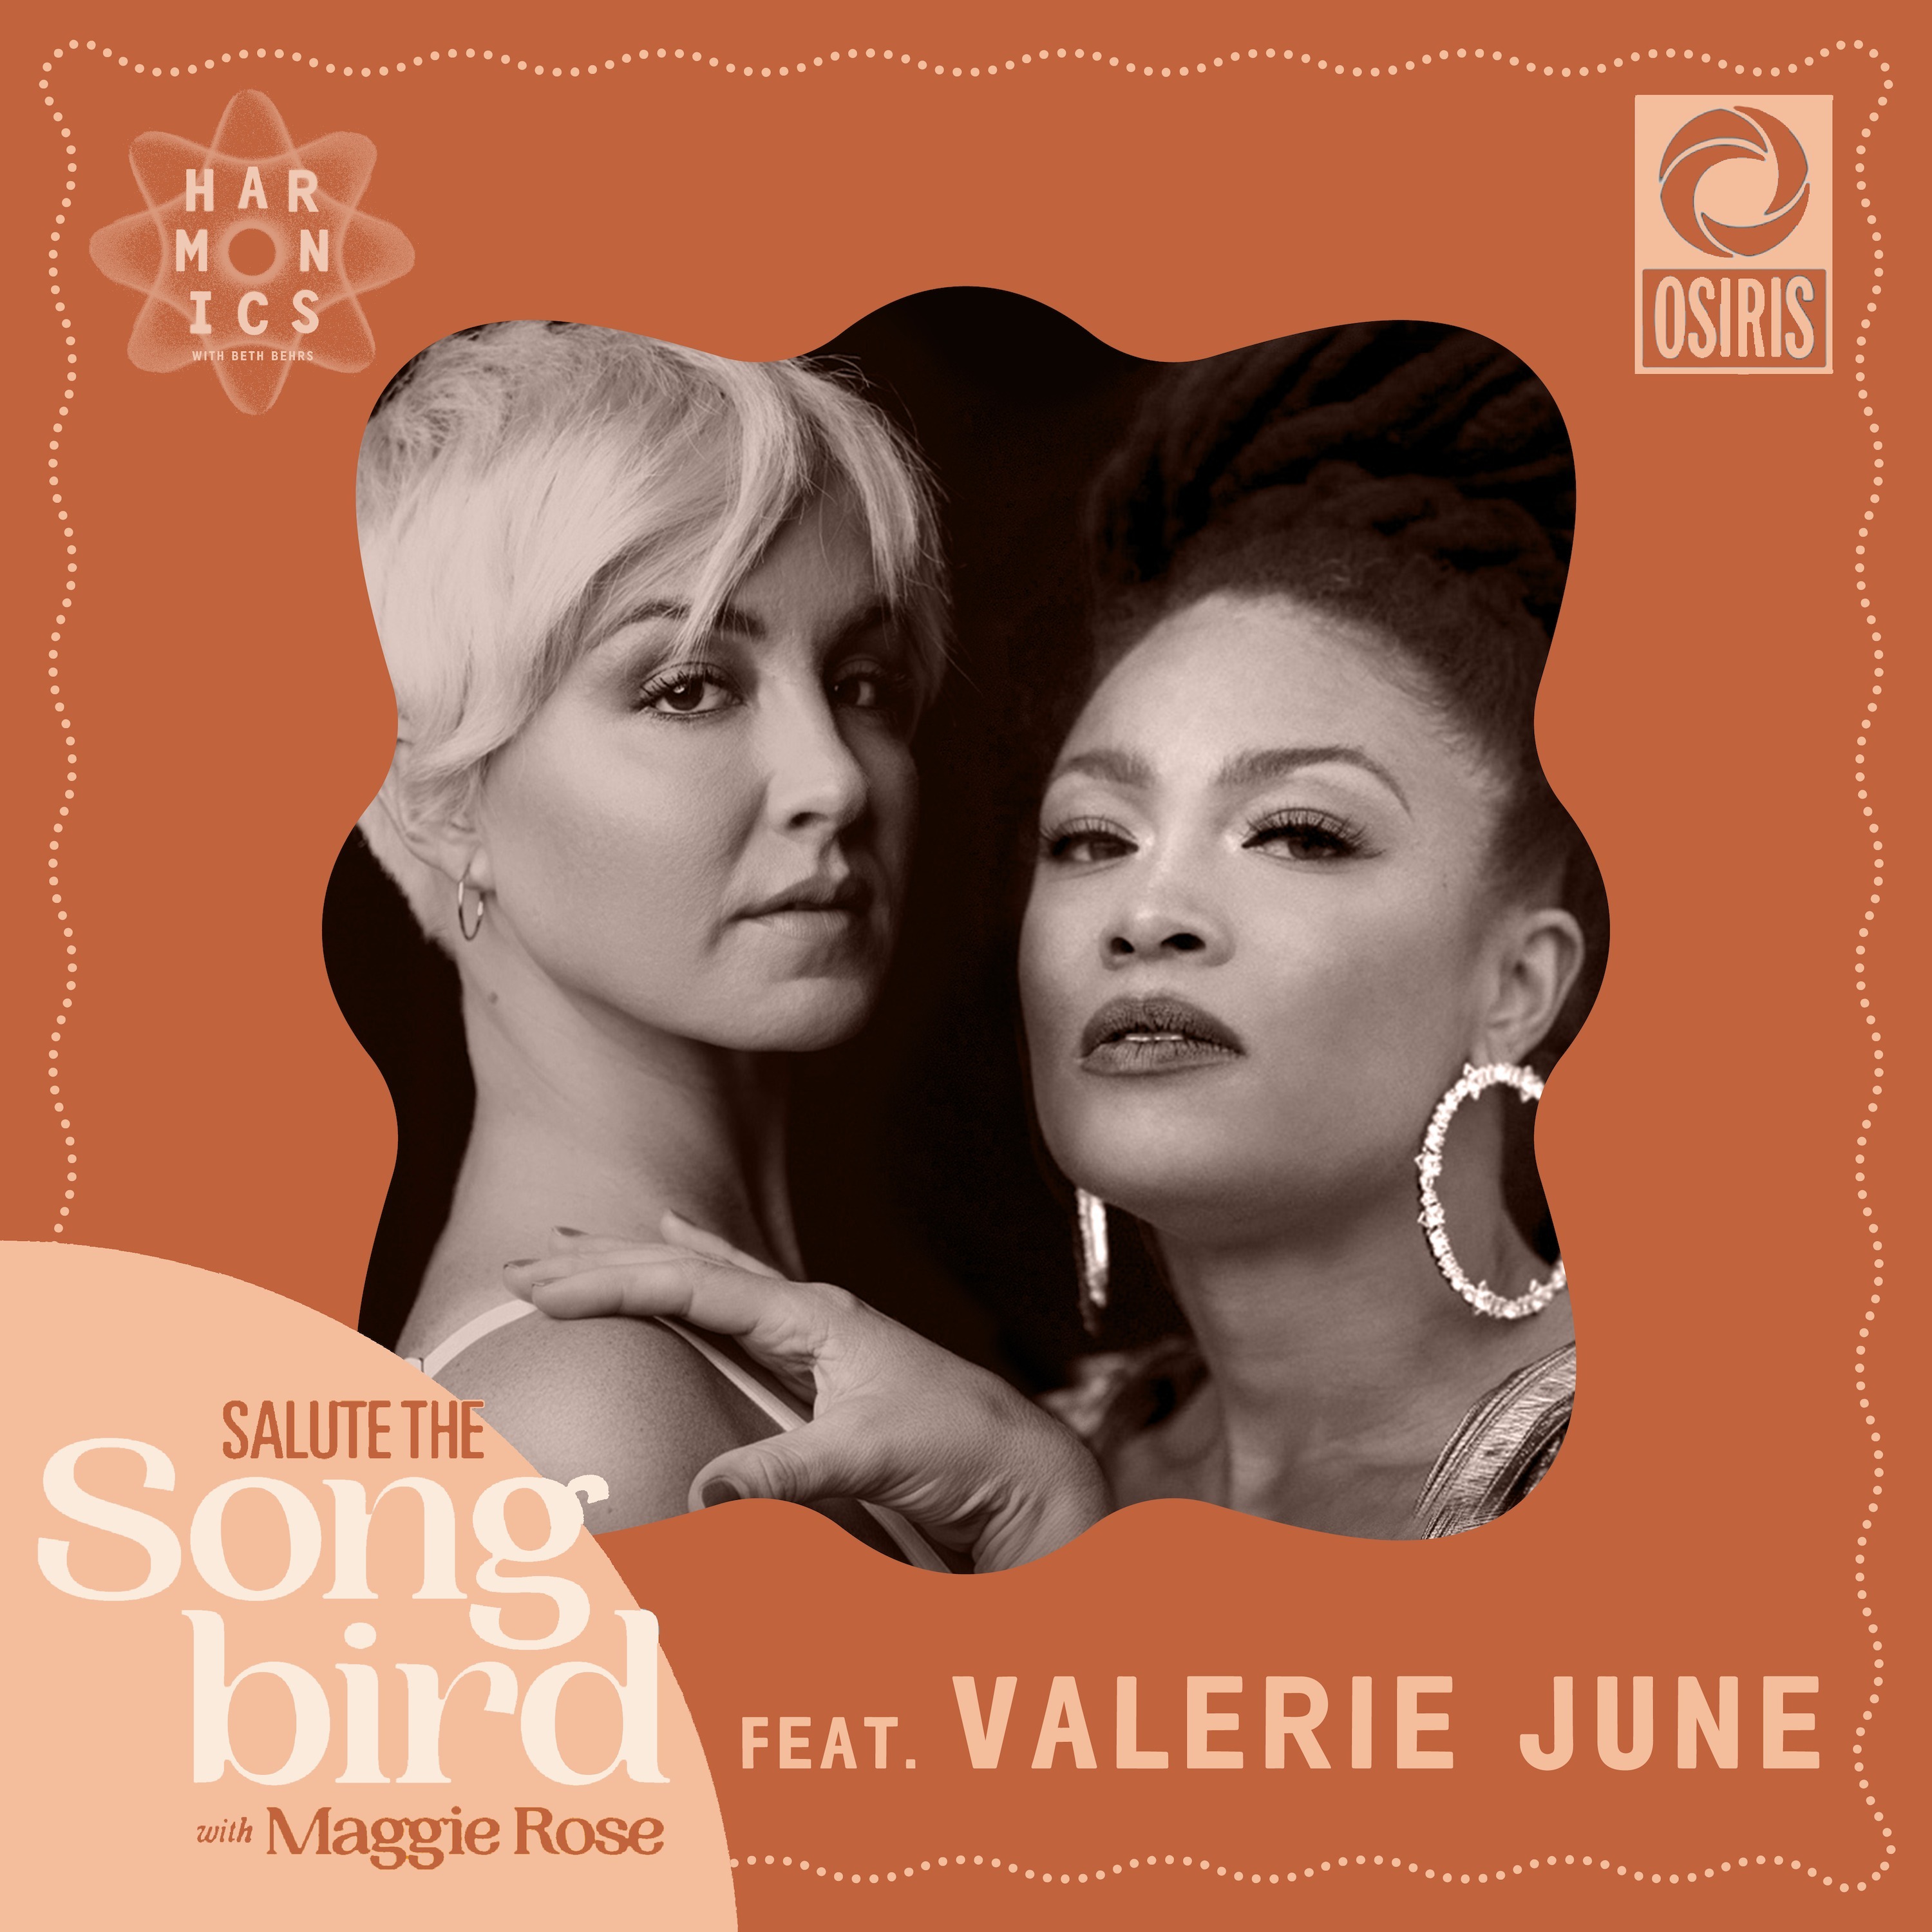 Salute the Songbird with Maggie Rose - Valerie June